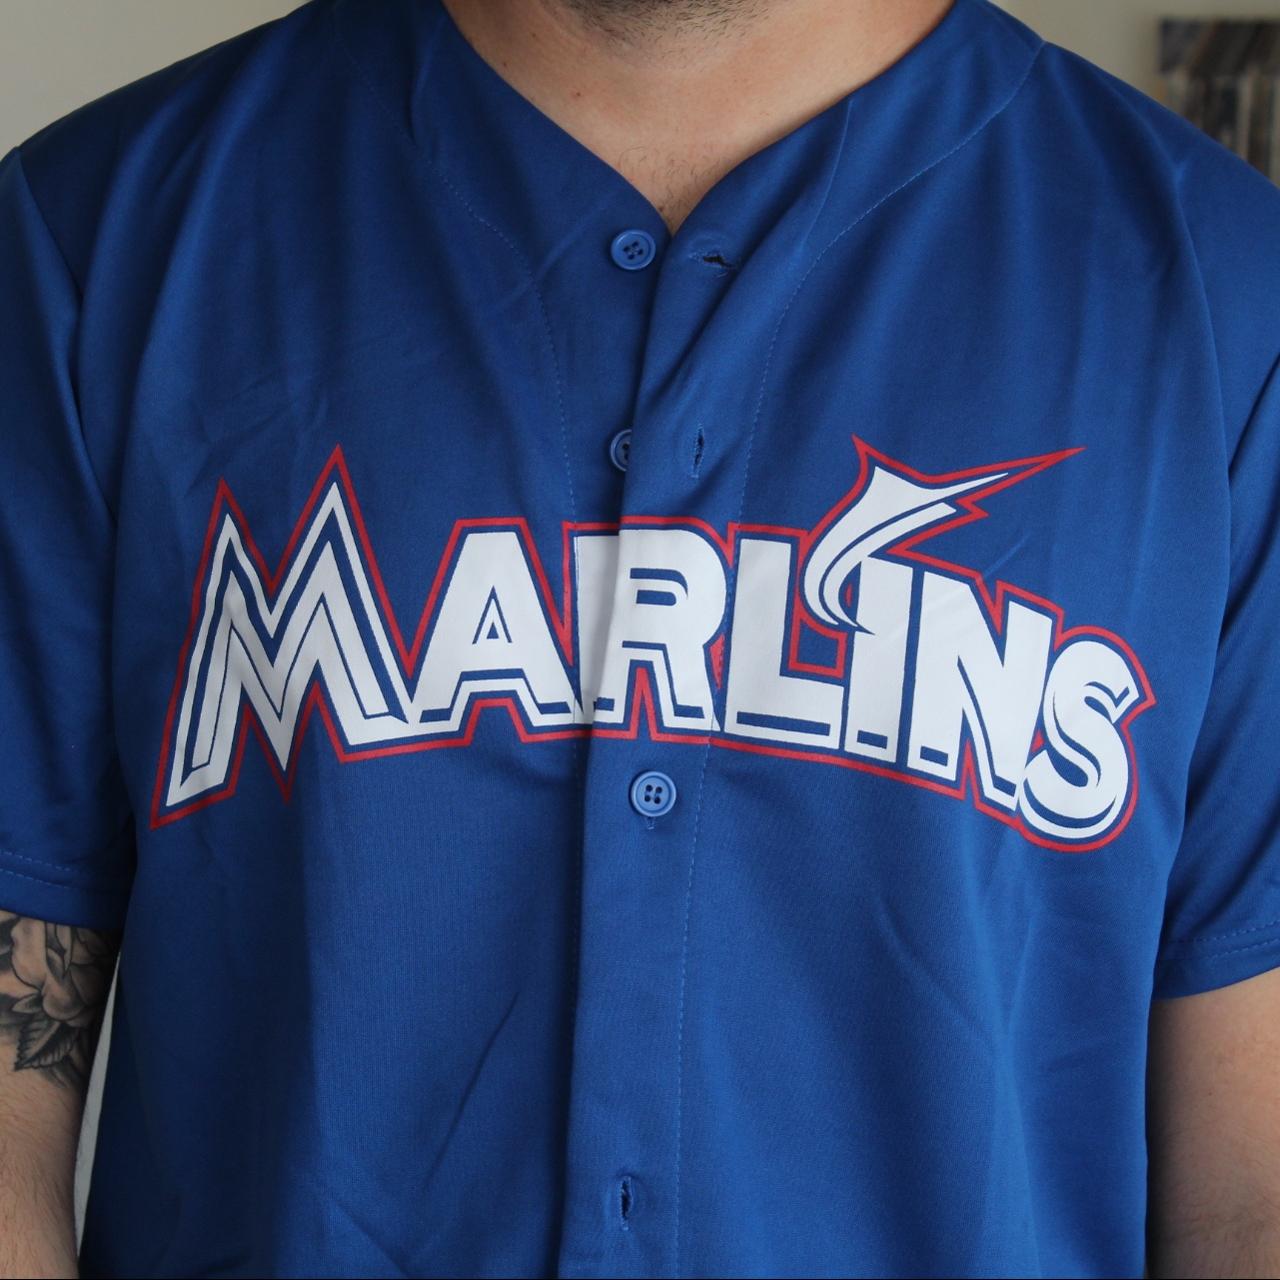 Miami Marlins baseball Puerto Rican heritage jersey for Sale in Miami, FL -  OfferUp